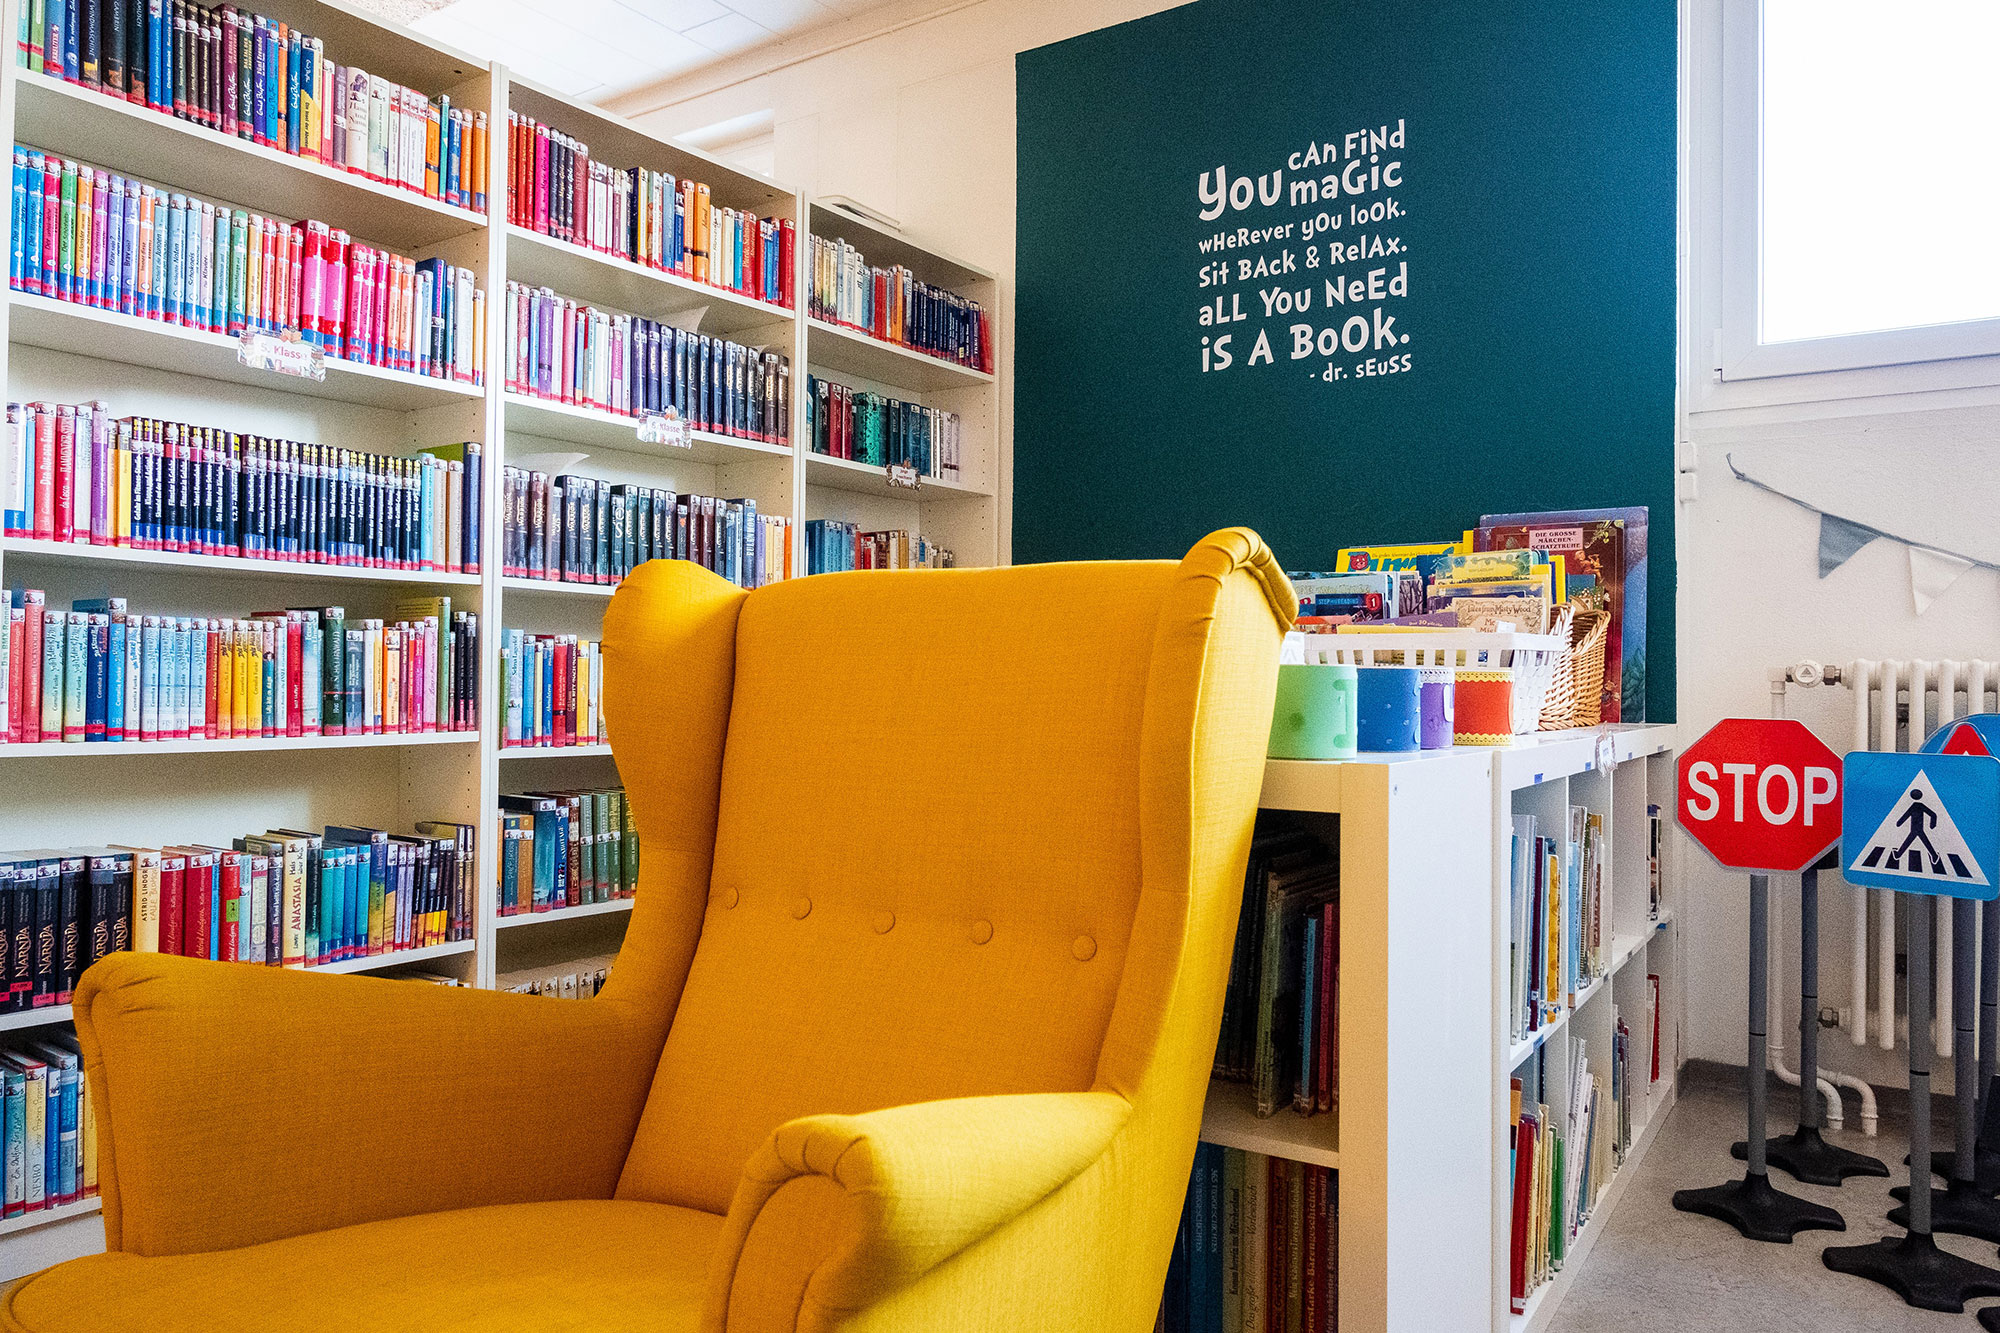 A yellow armchair stands in the colourful library and on the wall is the saying "You can find magic wherever you look. Sit back and relax. All you need is a book.	